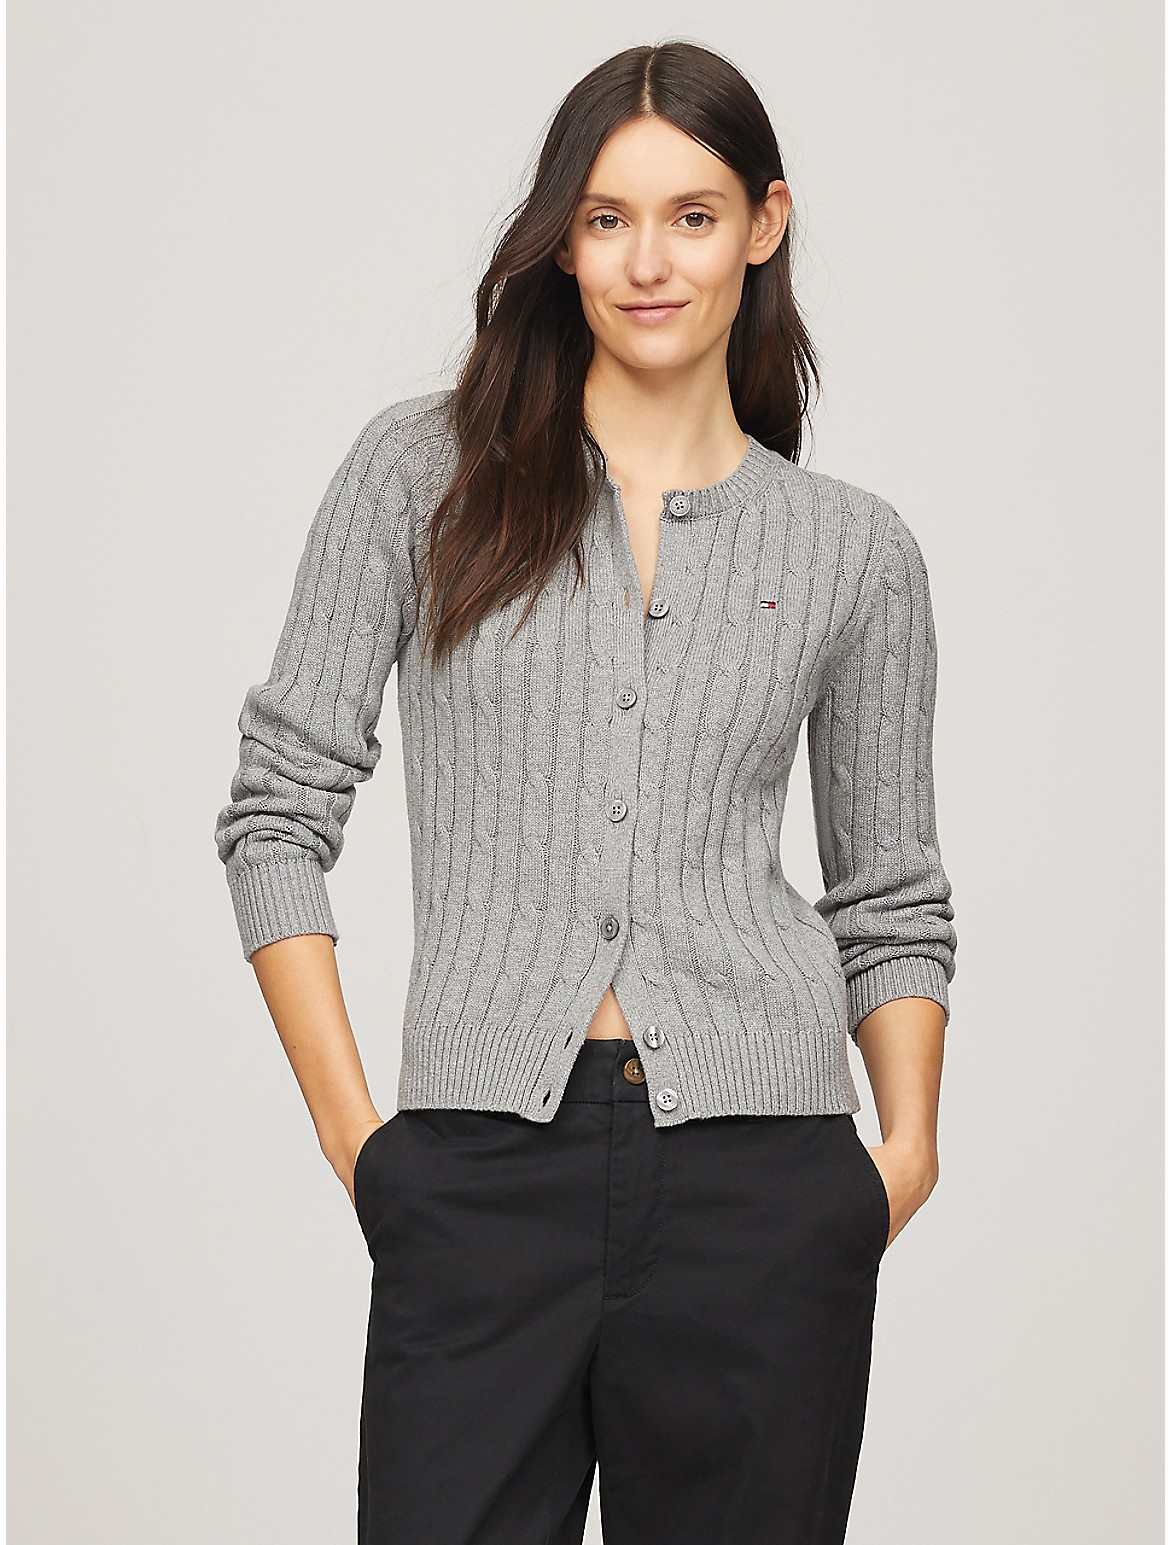 Tommy Hilfiger Women's Solid Cable Knit Cardigan